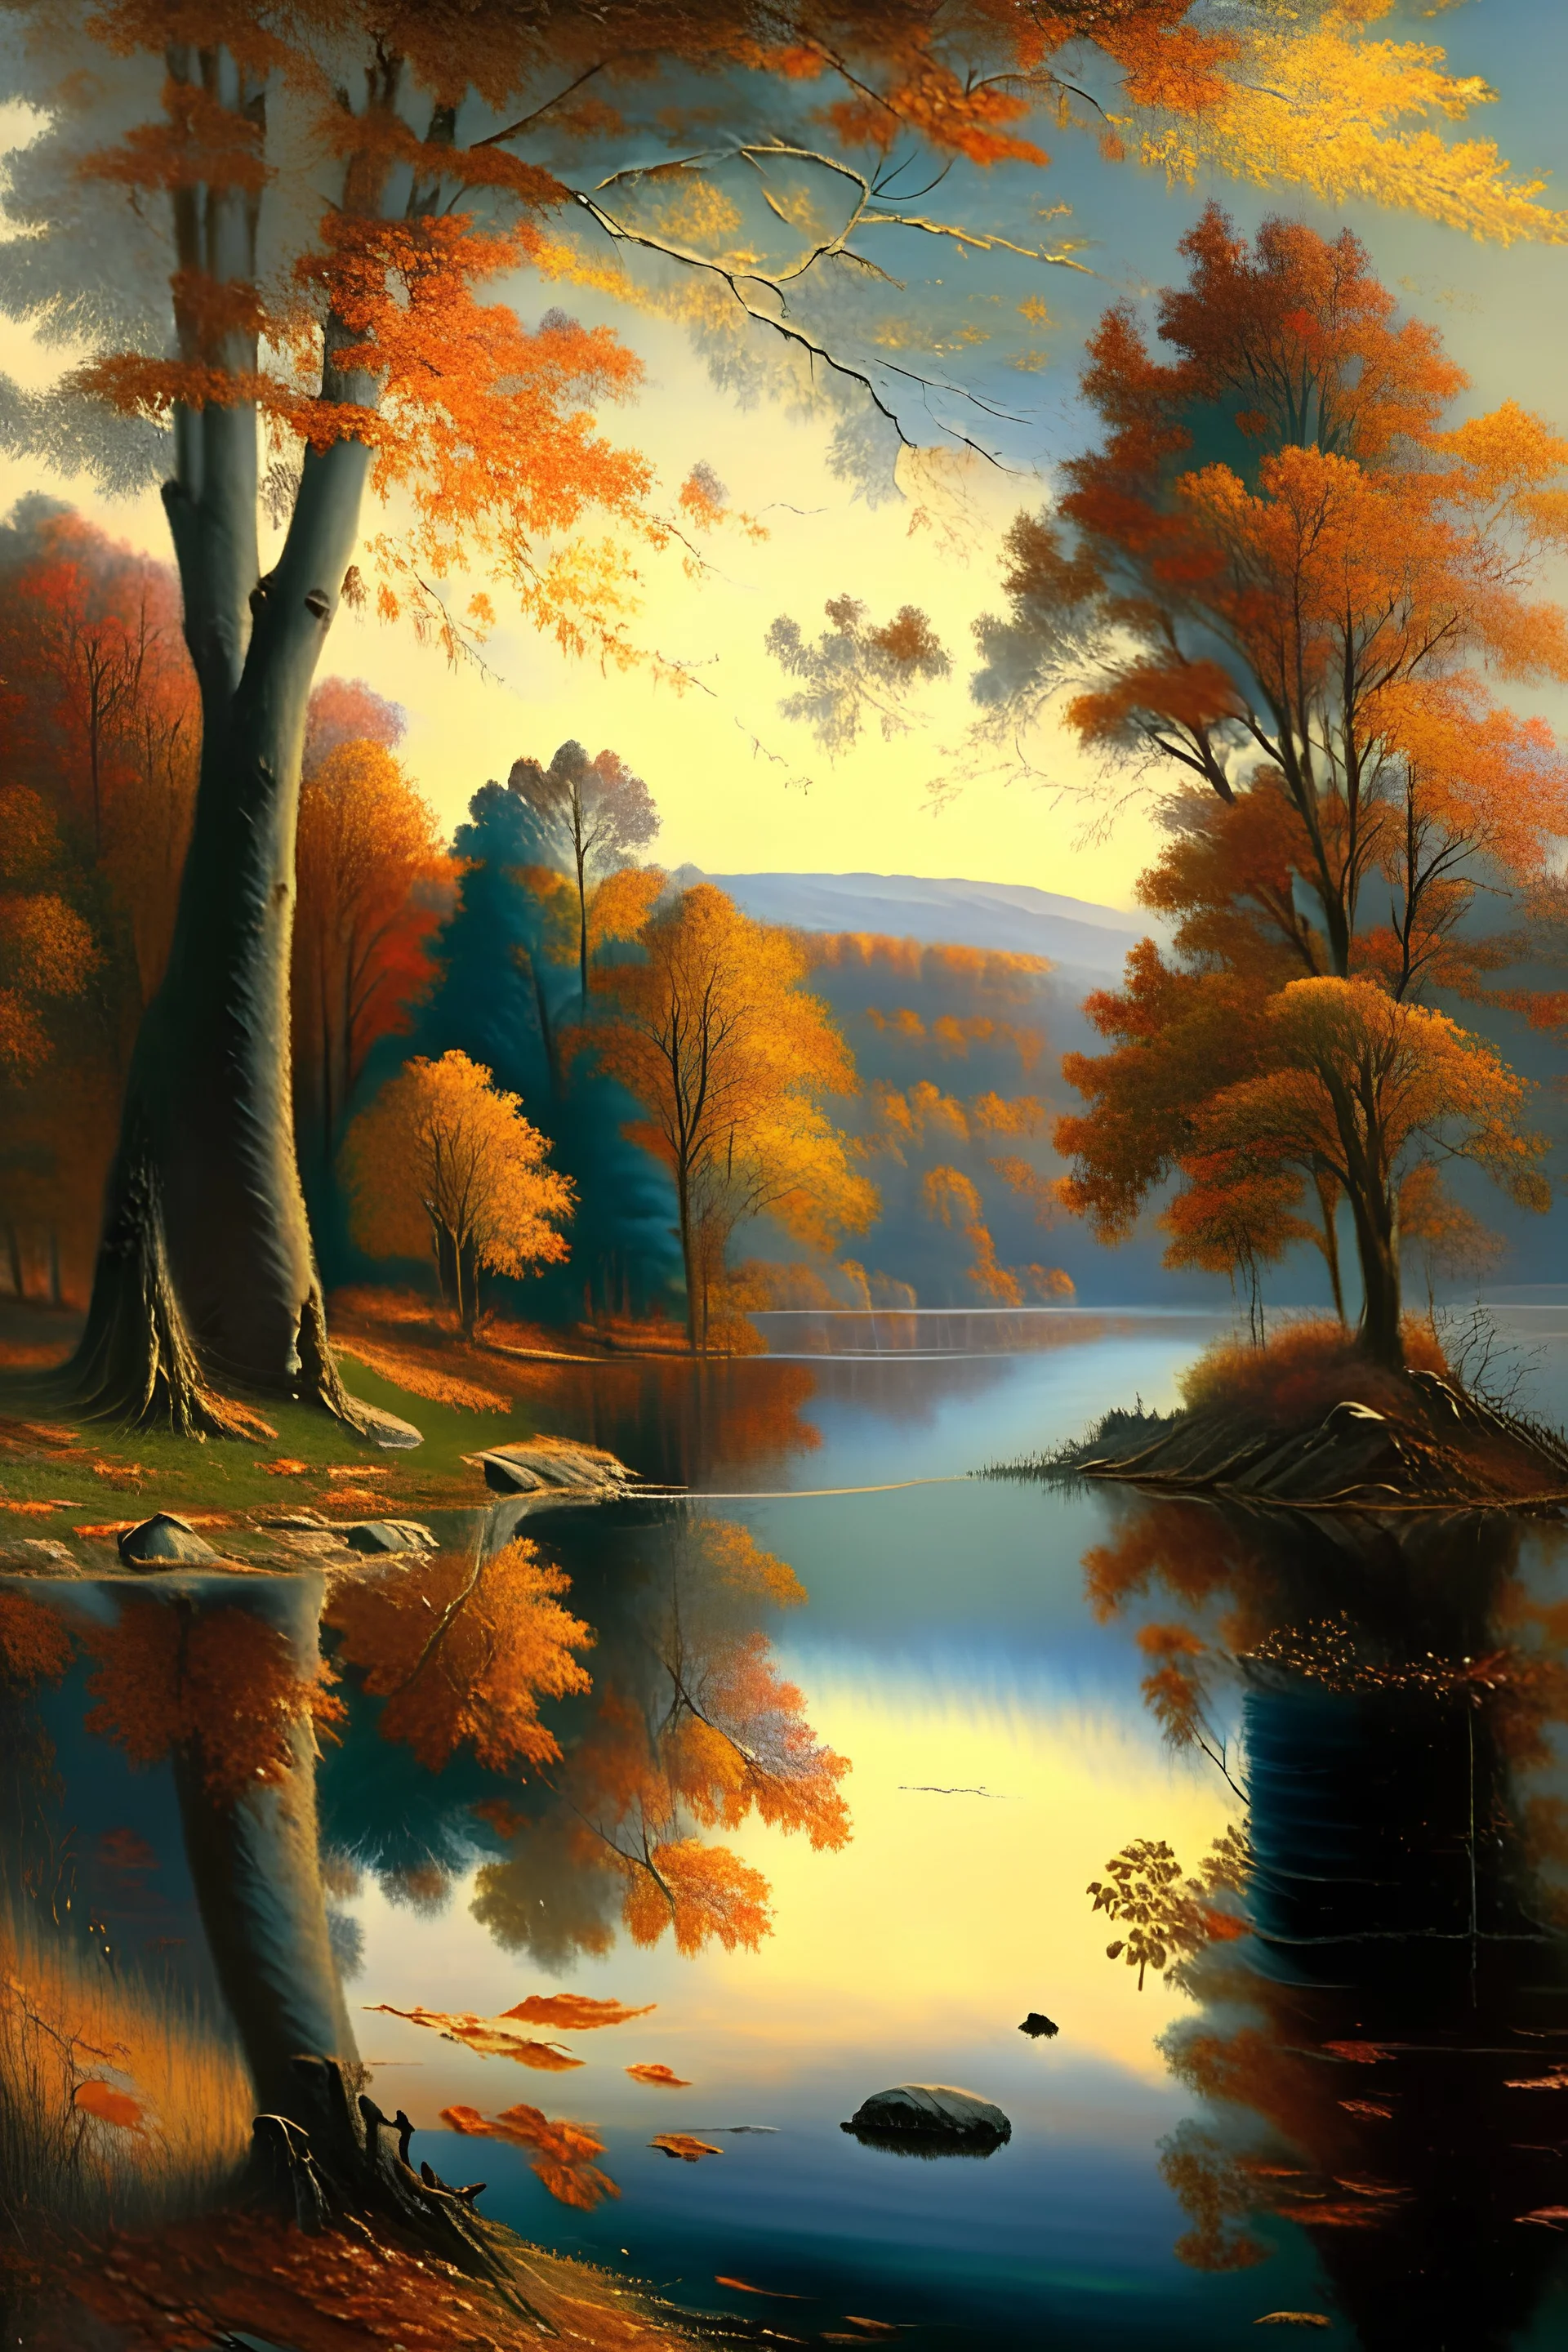 A serene autumn landscape with a reflective lake surrounded by trees with colorful fall foliage, in the style of the Hudson River School, capturing the romantic essence and fine details.